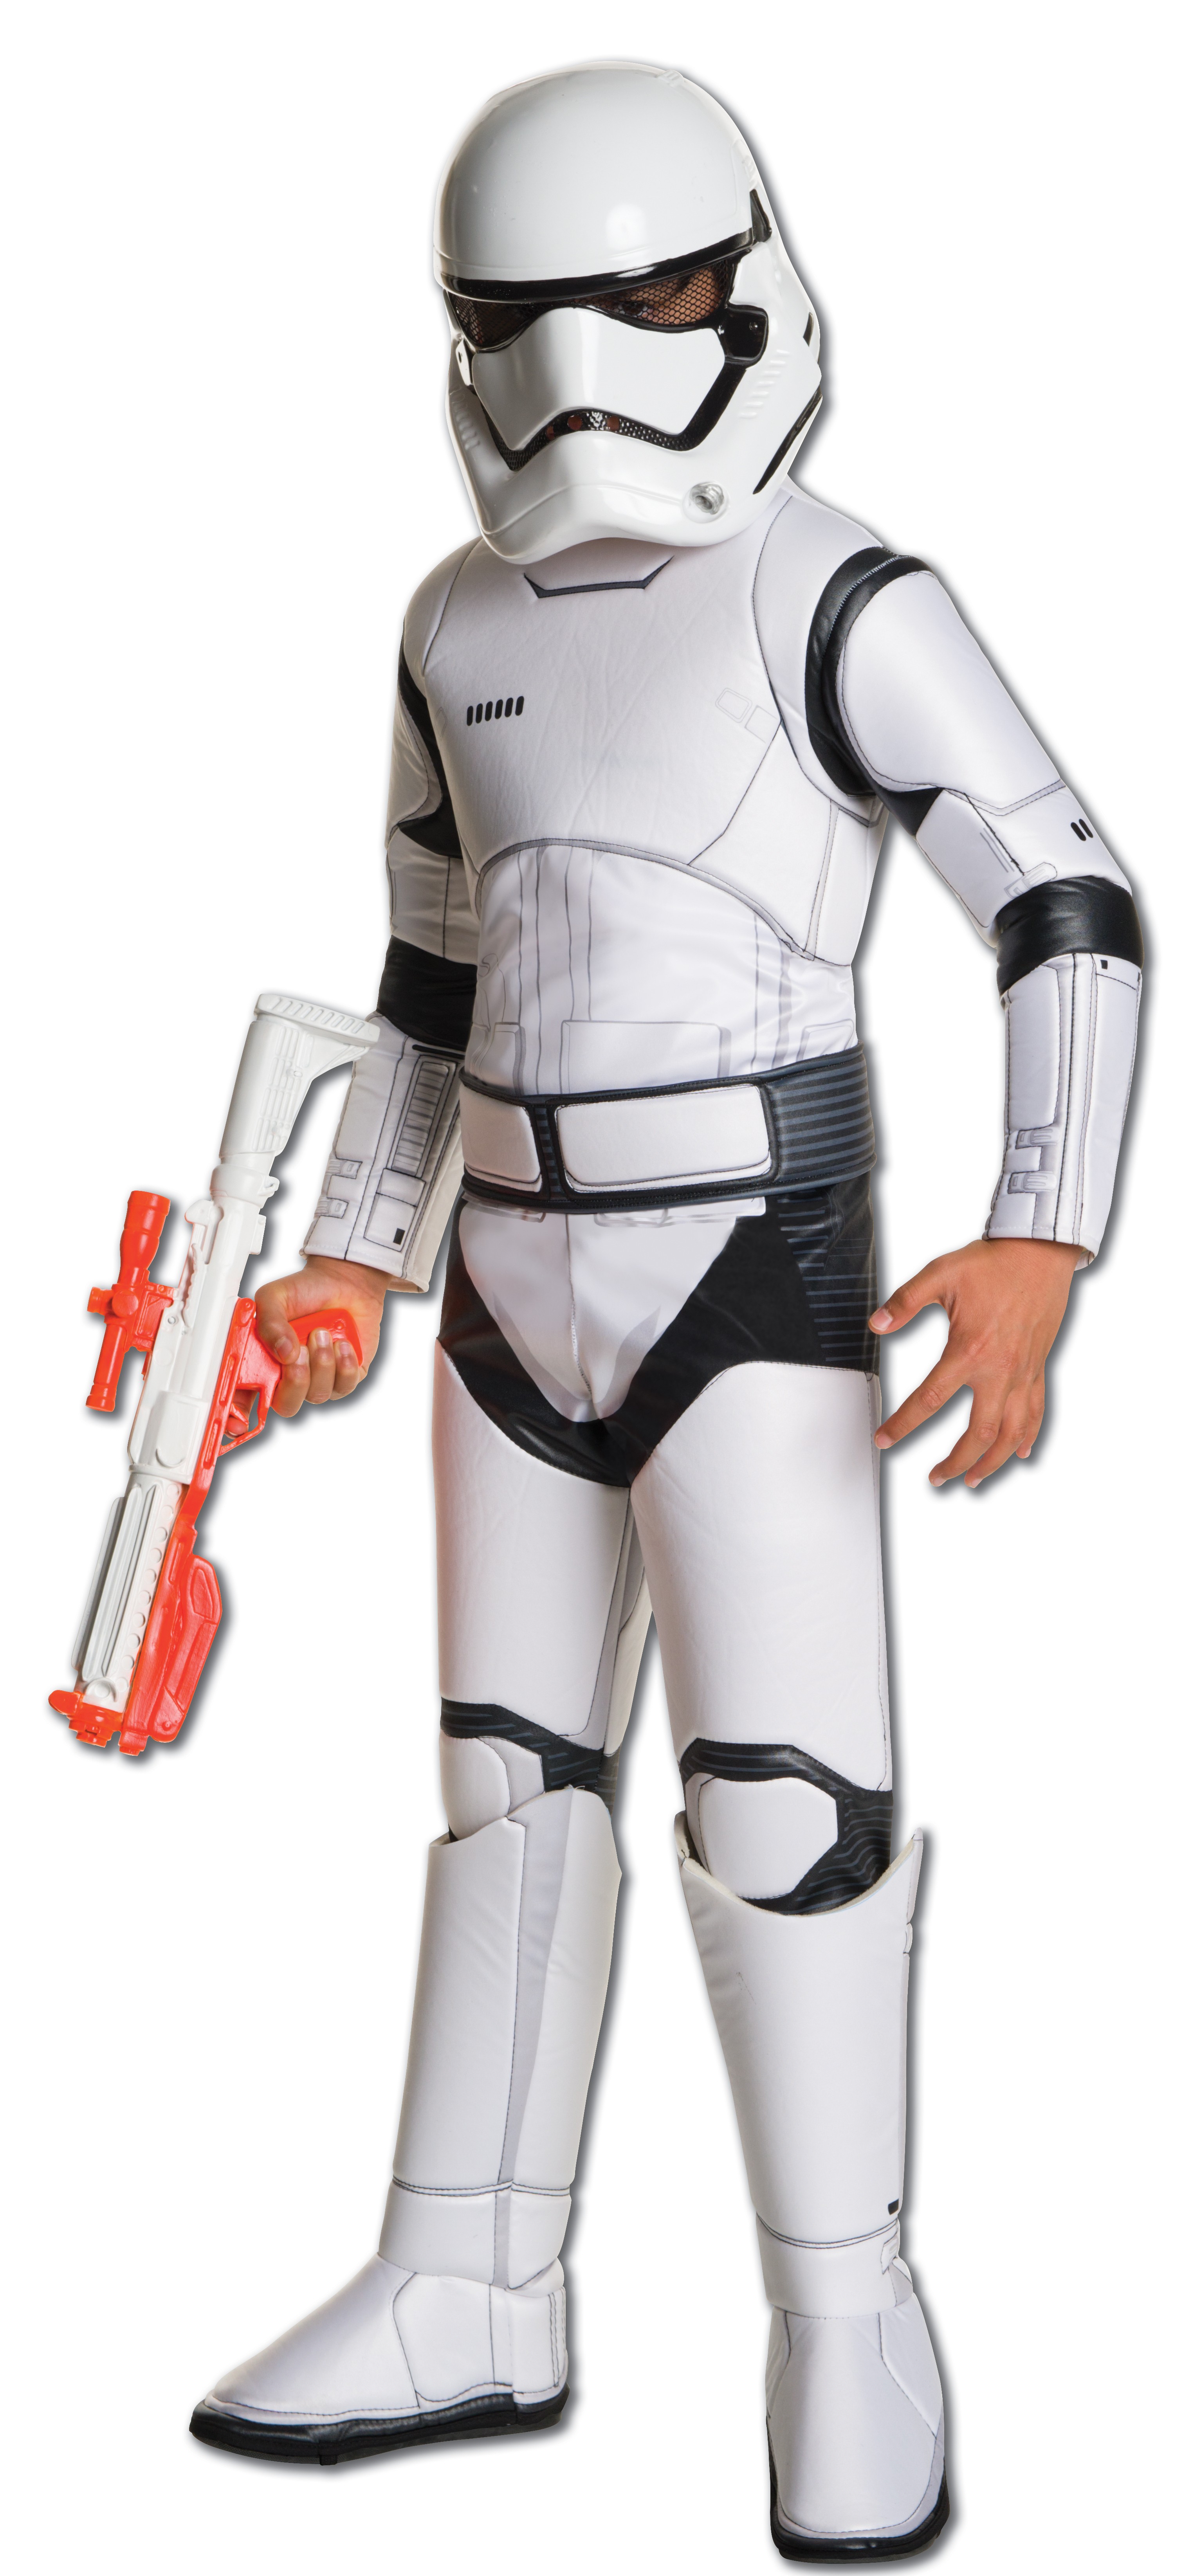 Star Wars Force Awakens Stormtrooper Child Super Deluxe Costume Size S,M,L - Click Image to Close